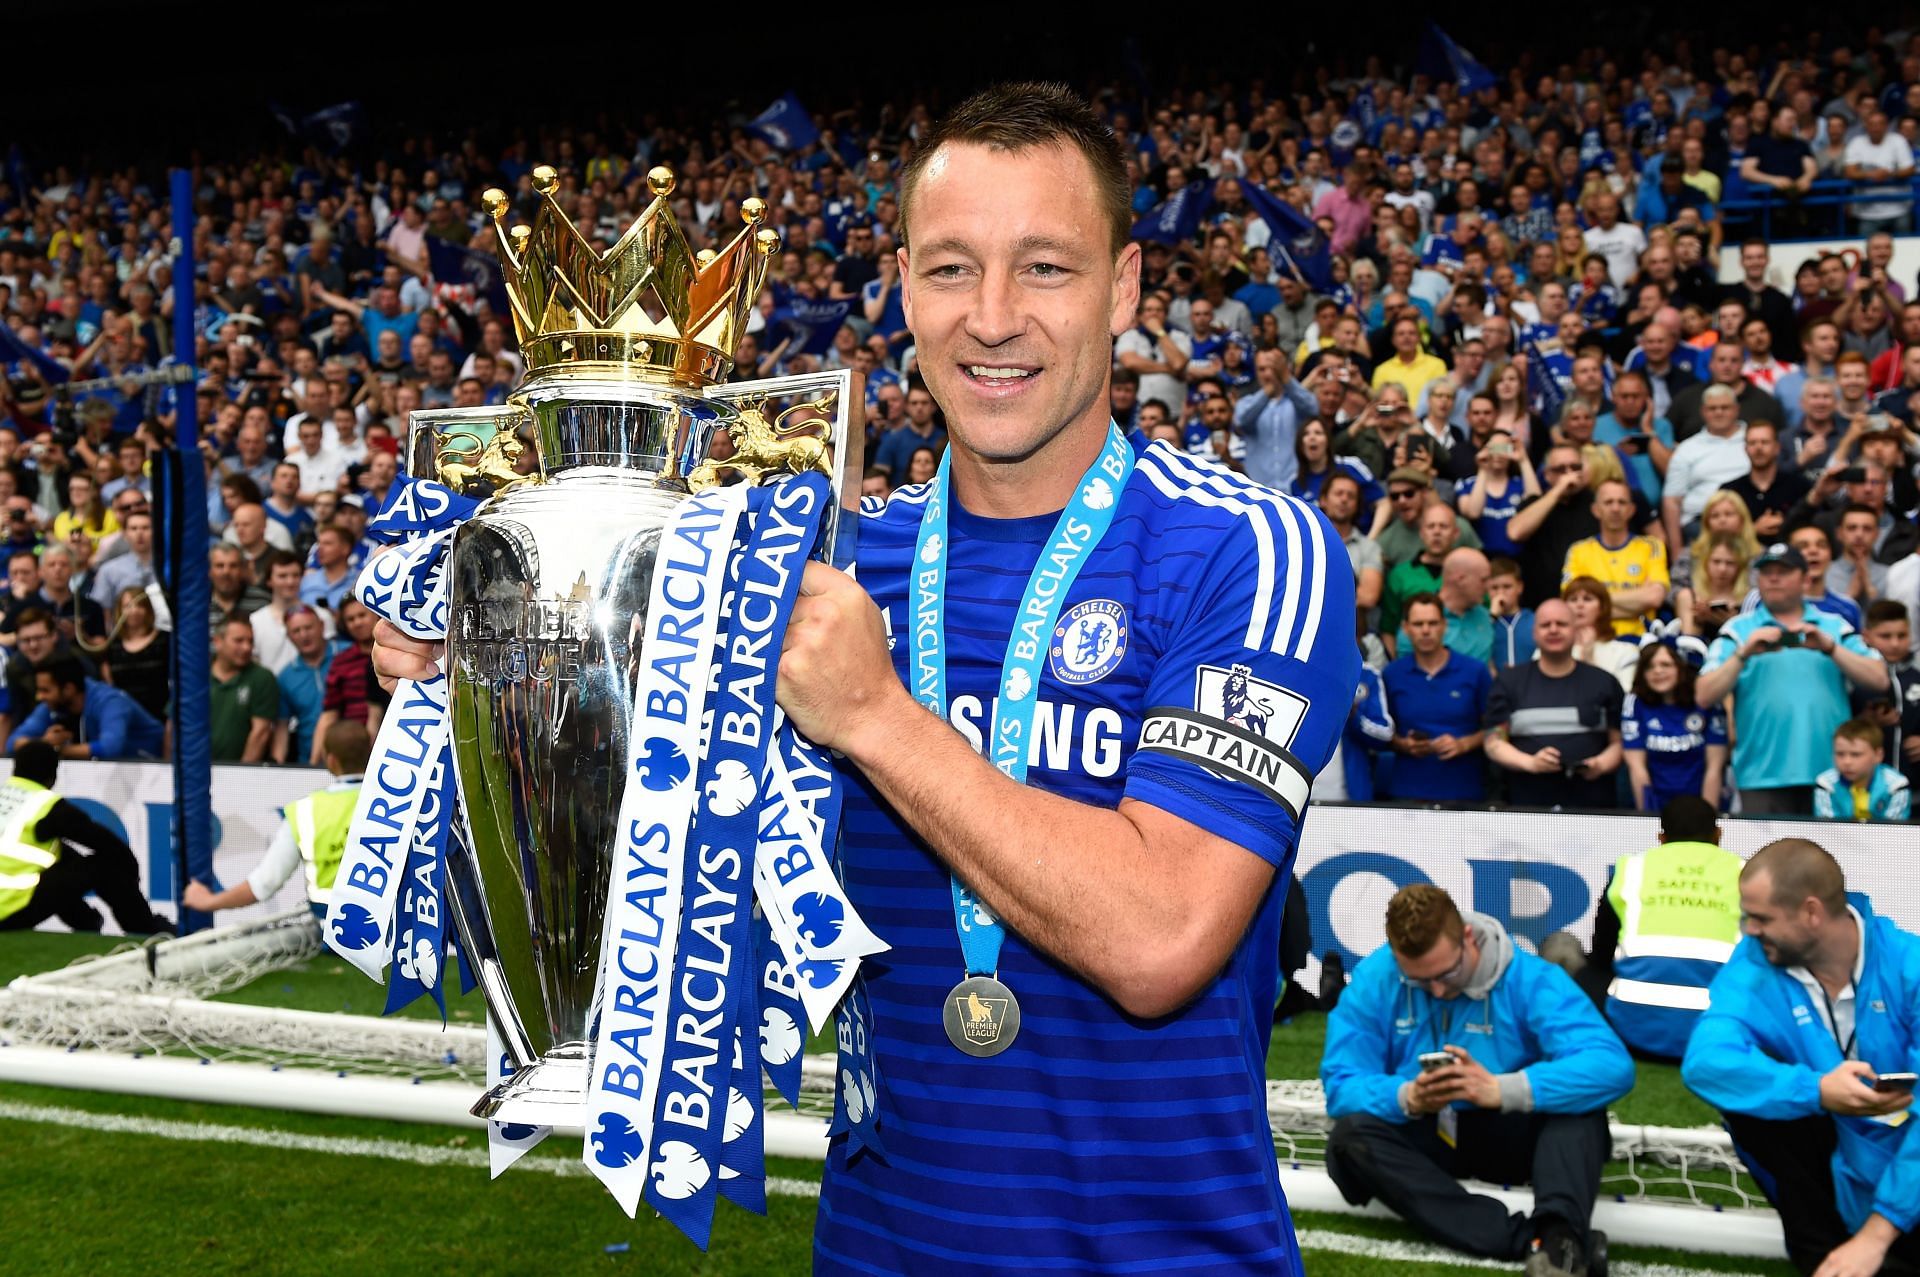 John Terry is one of the greatest captains the Premier League has seen